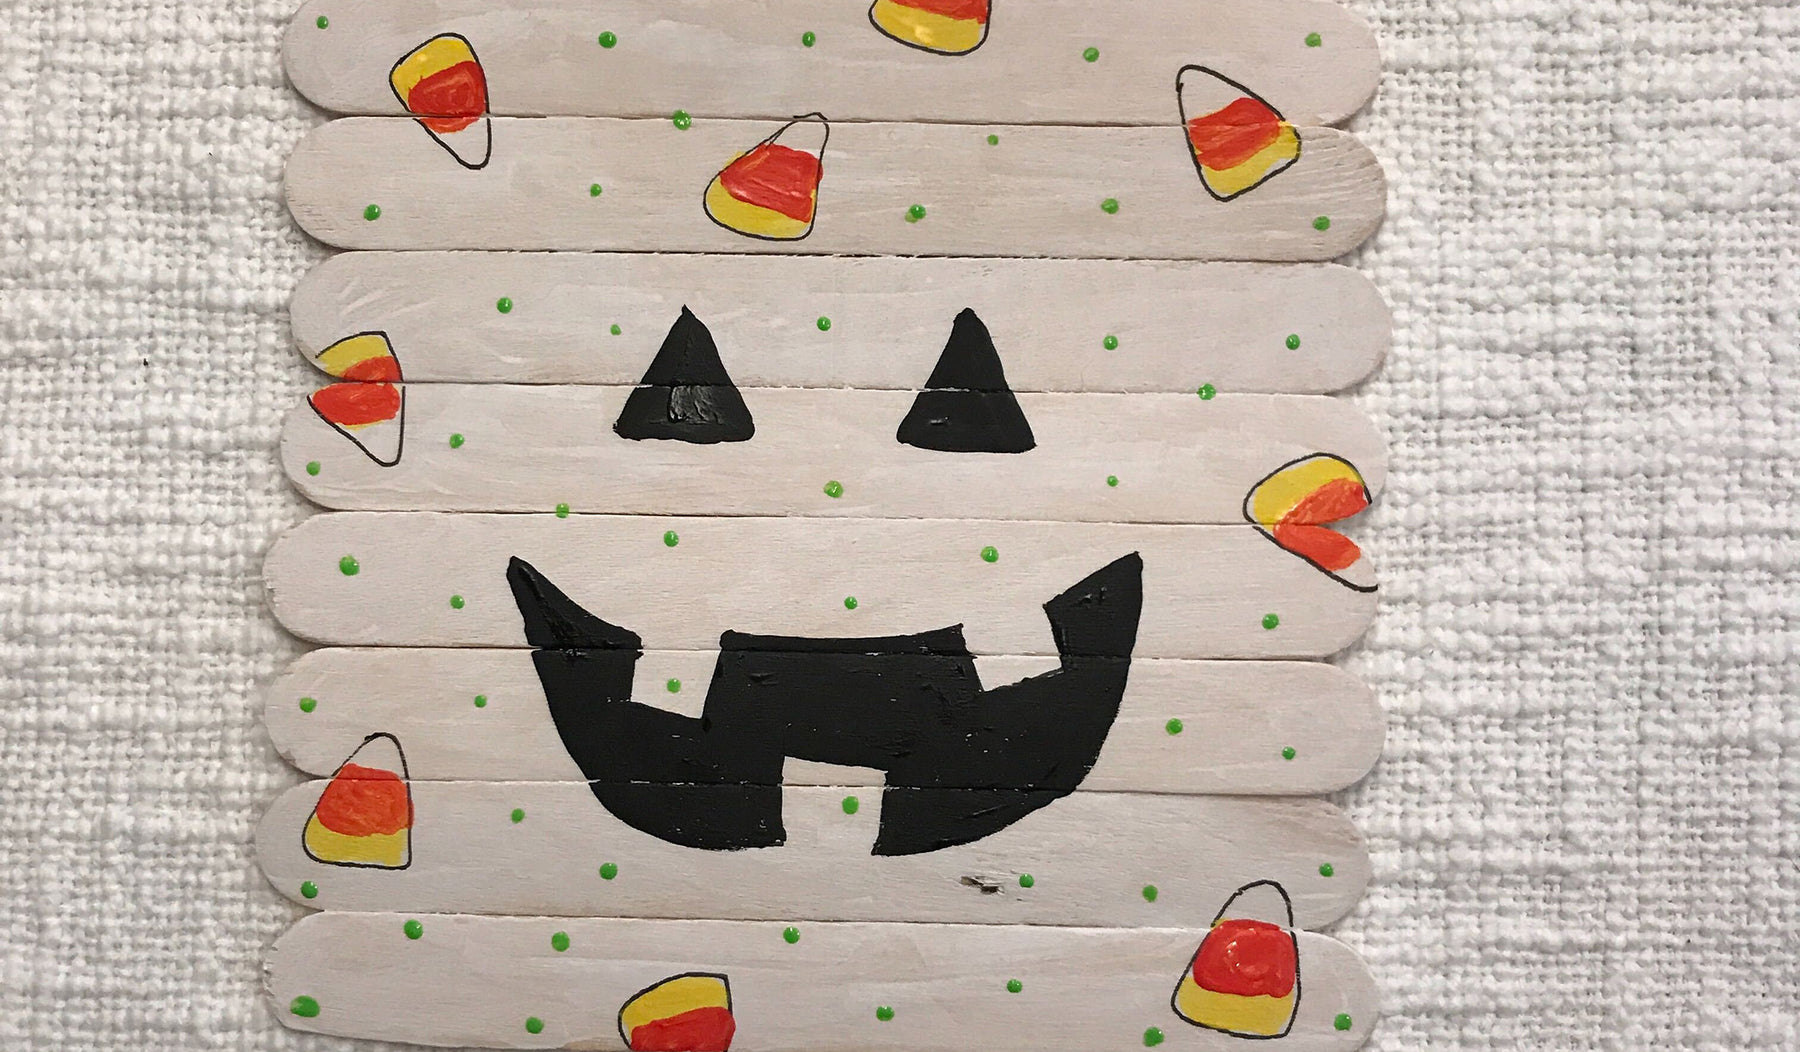 Popsicle sticks painted to form a square puzzle with a Jack O' Lantern face with candy-corn designs on top.